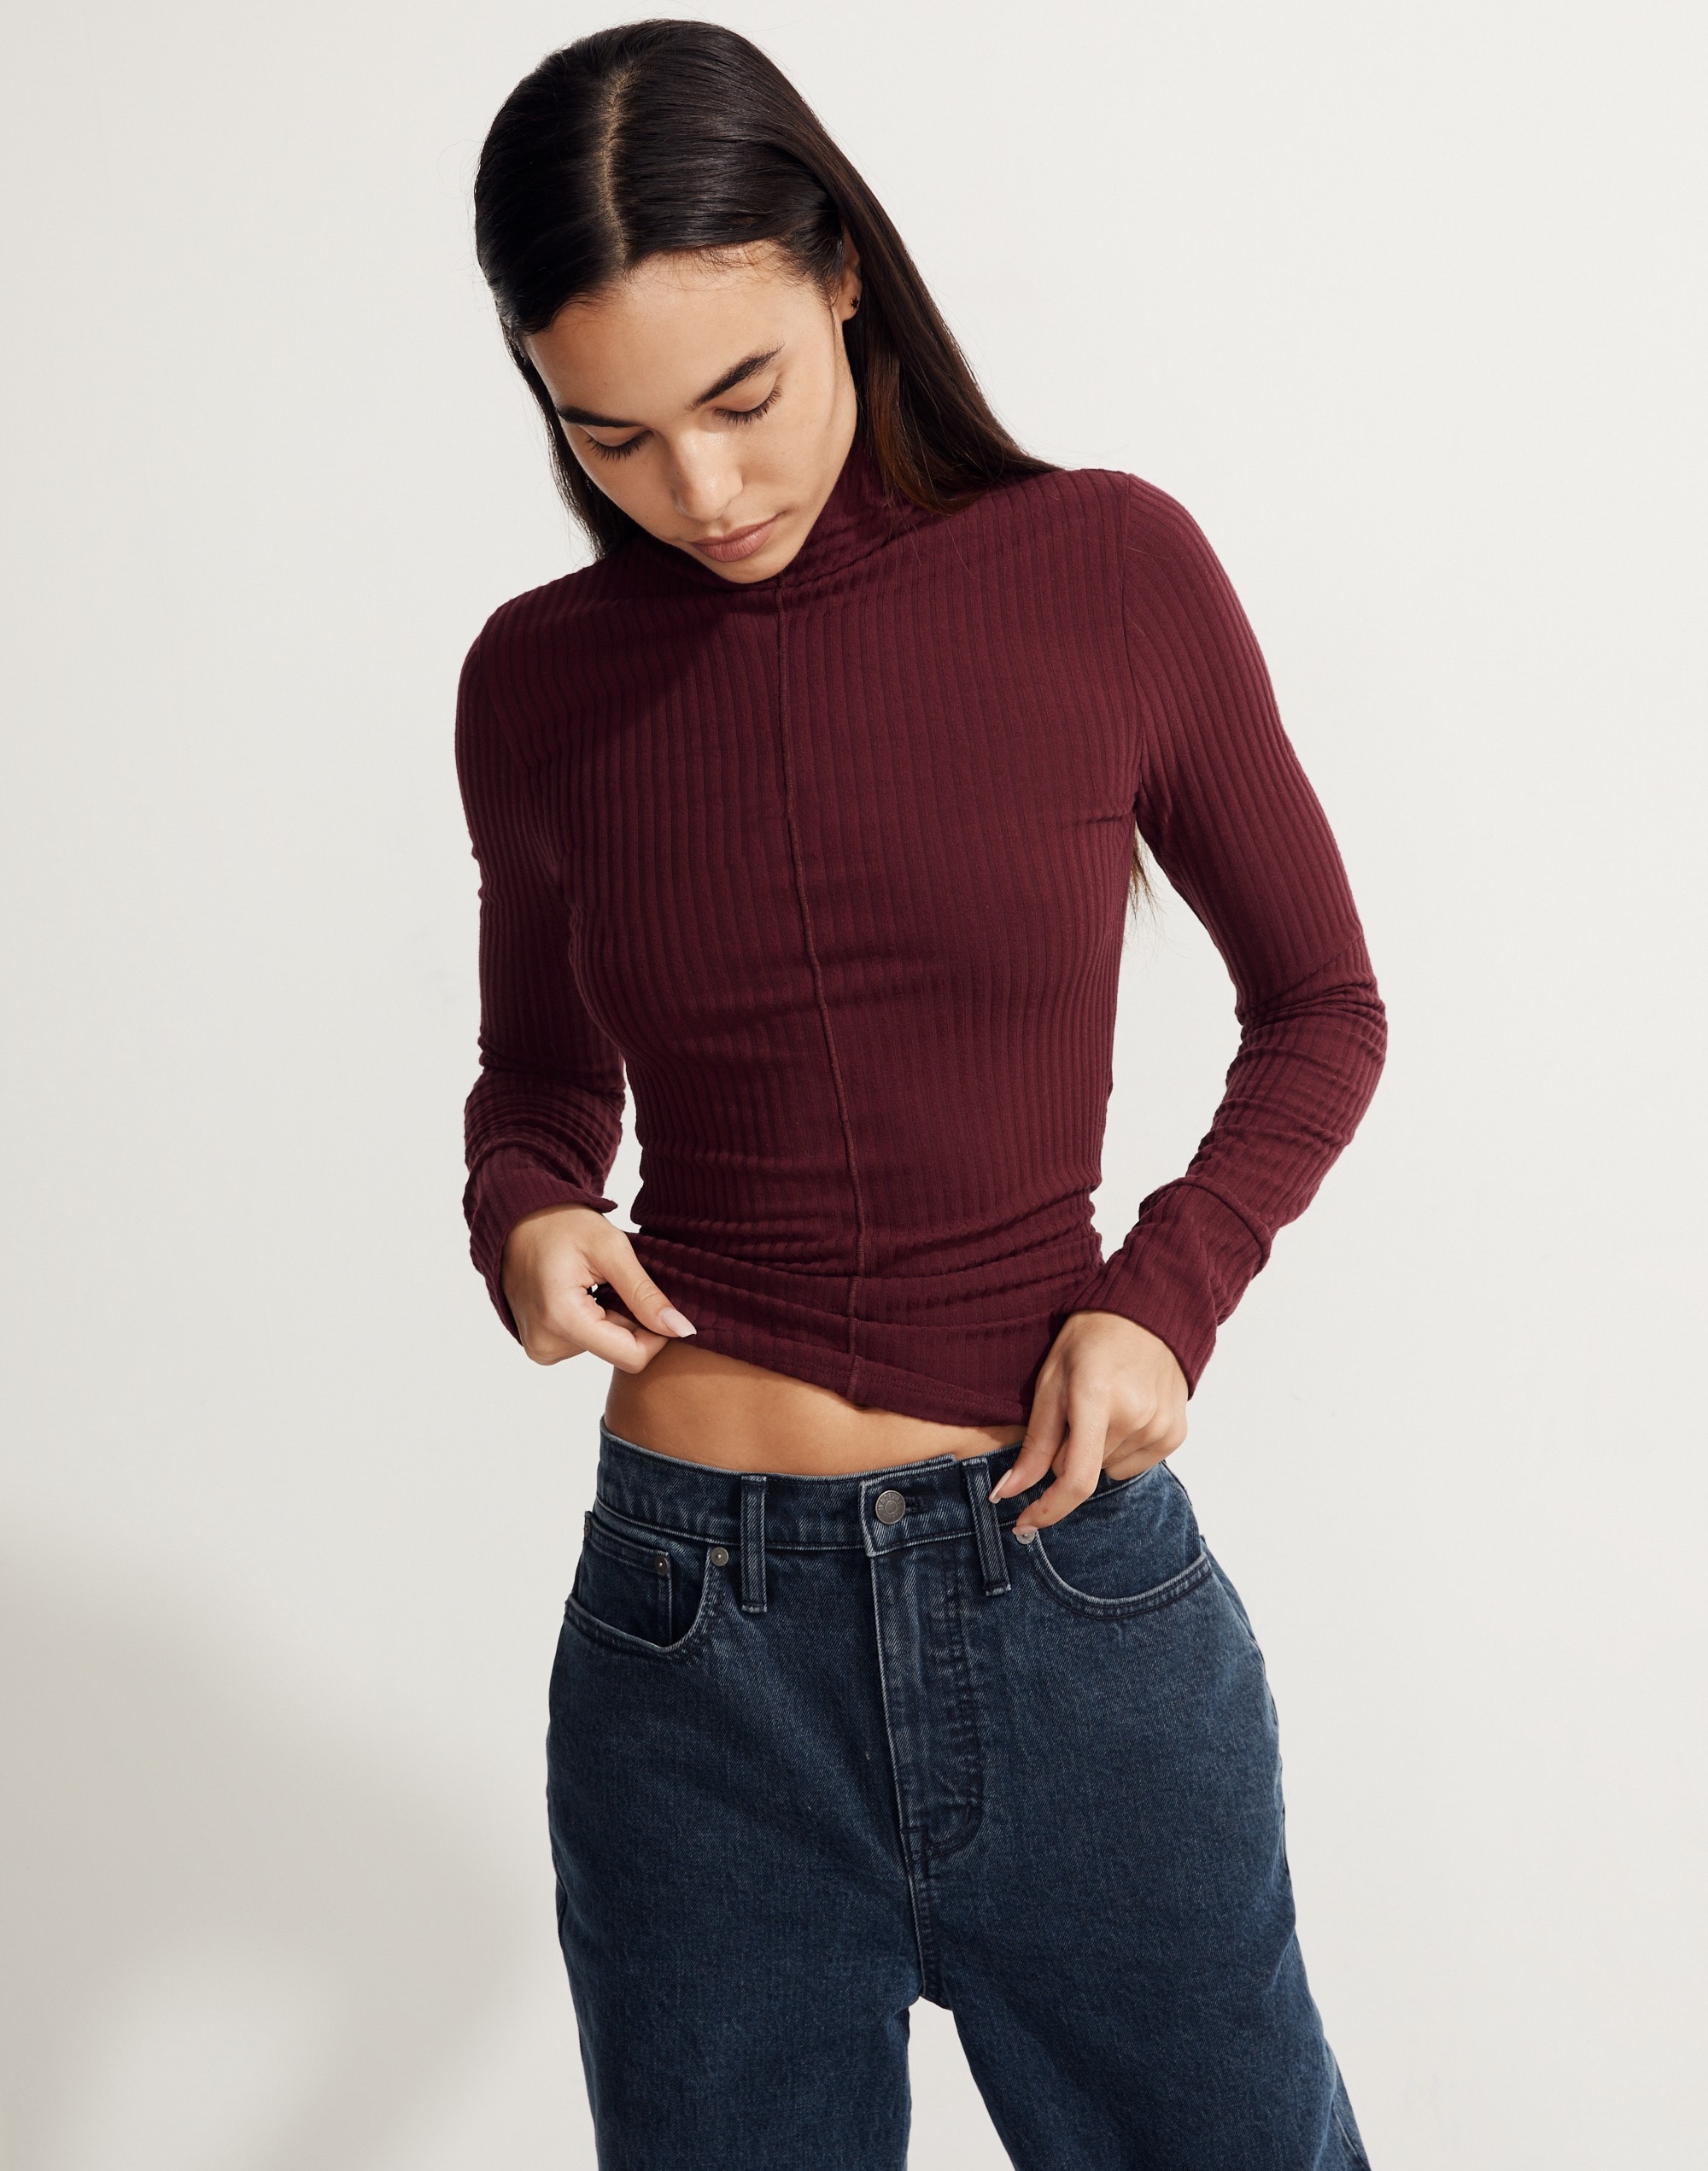 Ribbed Turtleneck Long Sleeve Solid Casual Top